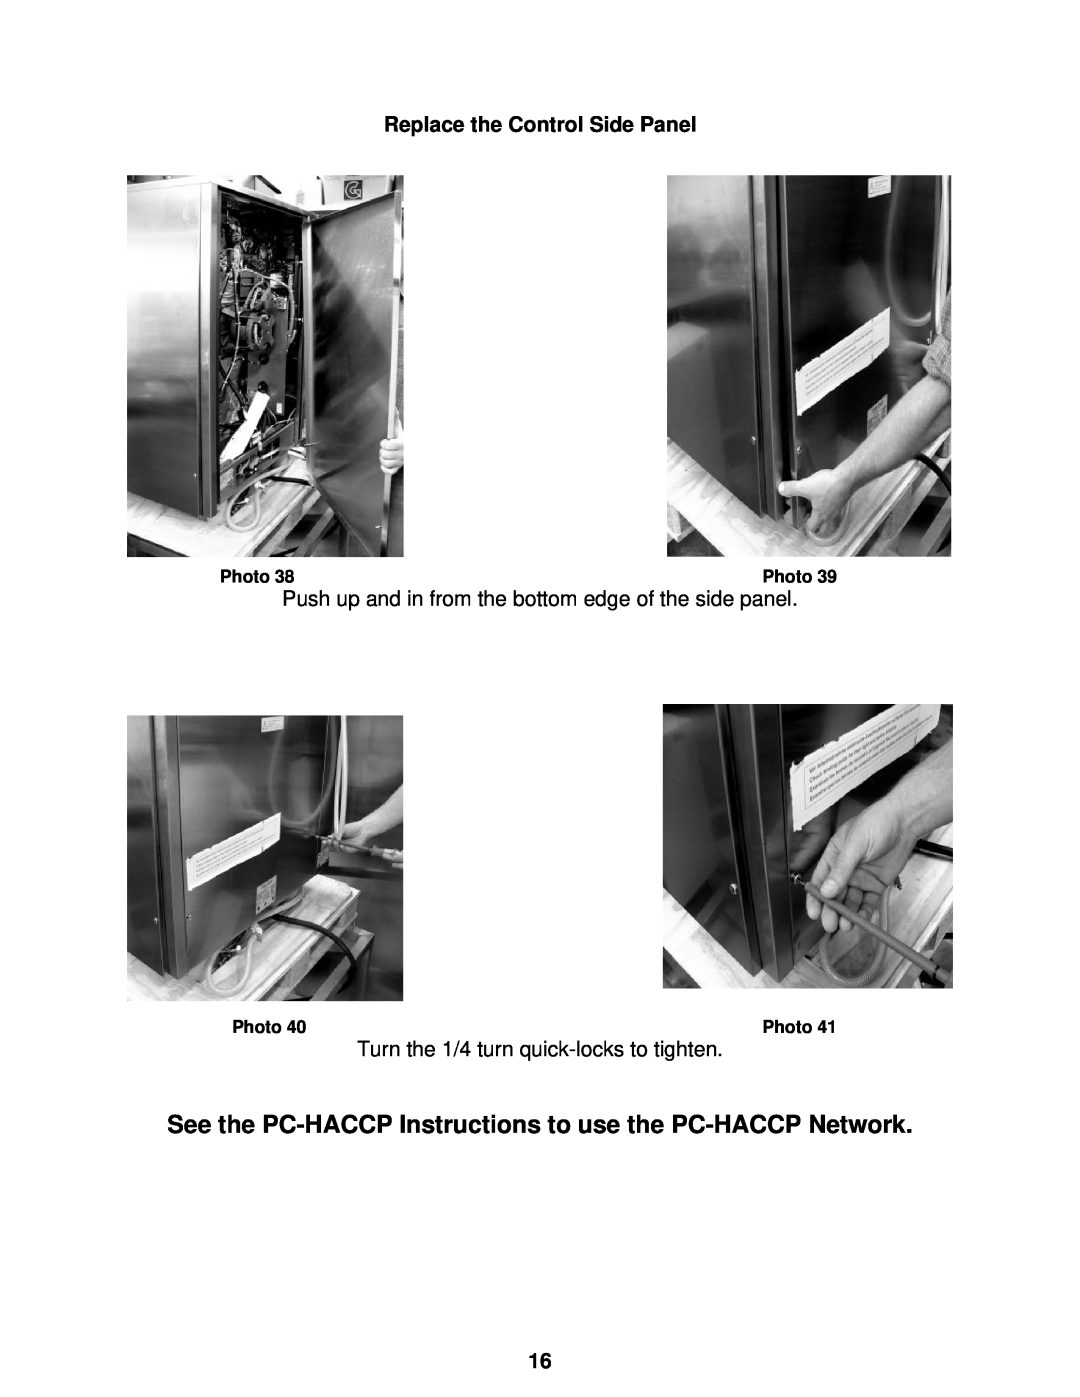 Cleveland Range Steam Oven See the PC-HACCP Instructions to use the PC-HACCP Network, Replace the Control Side Panel 